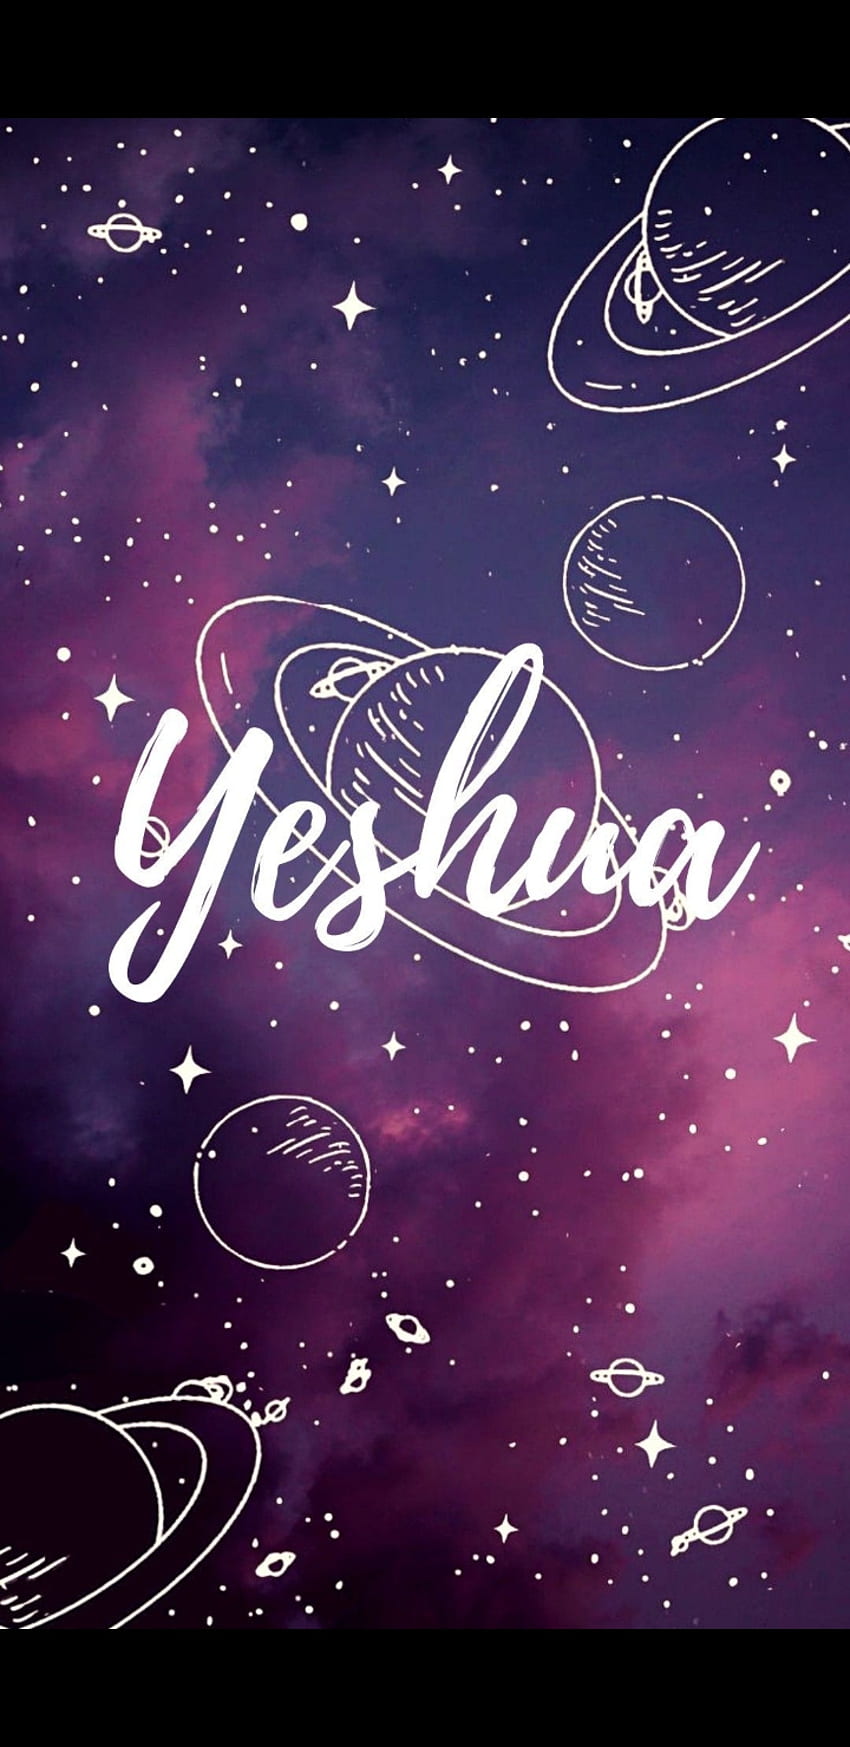 Yeshua wallpaper by VitorM13  Download on ZEDGE  fe37